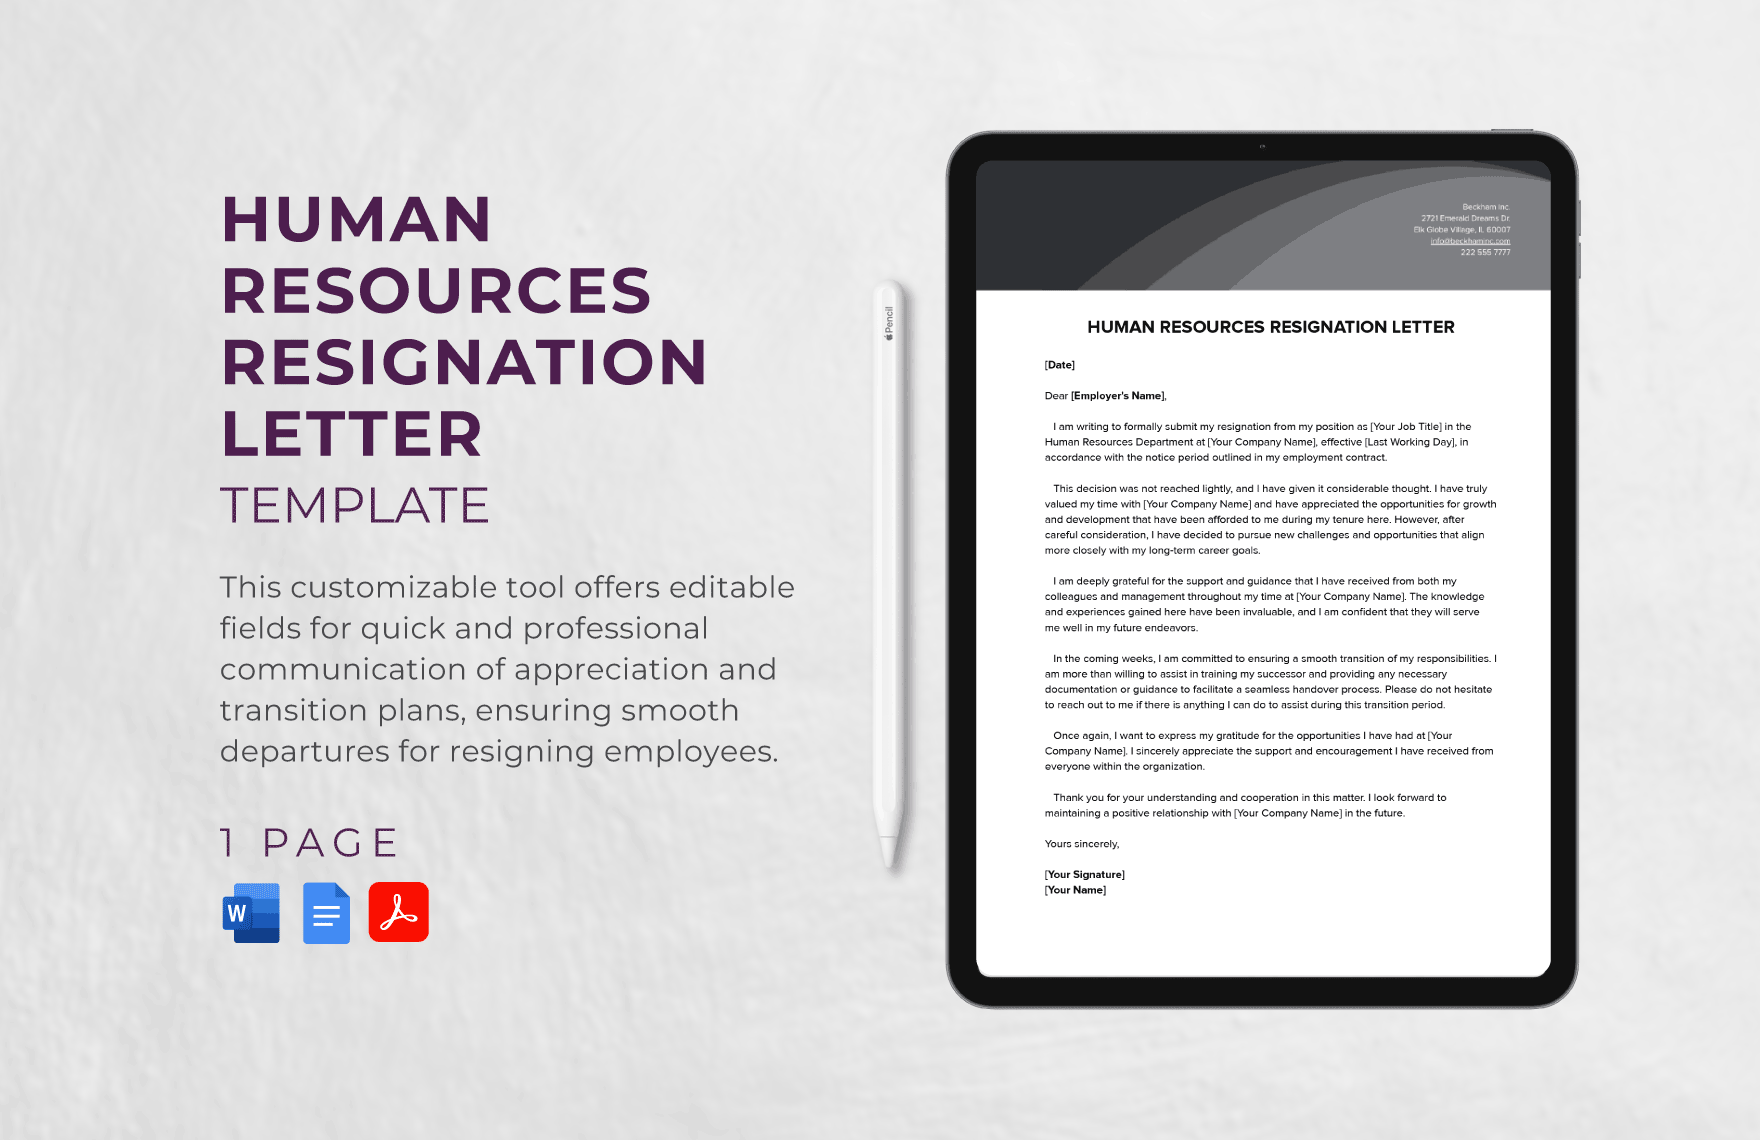 Human Resources Resignation Letter Template in Word, Google Docs, PDF